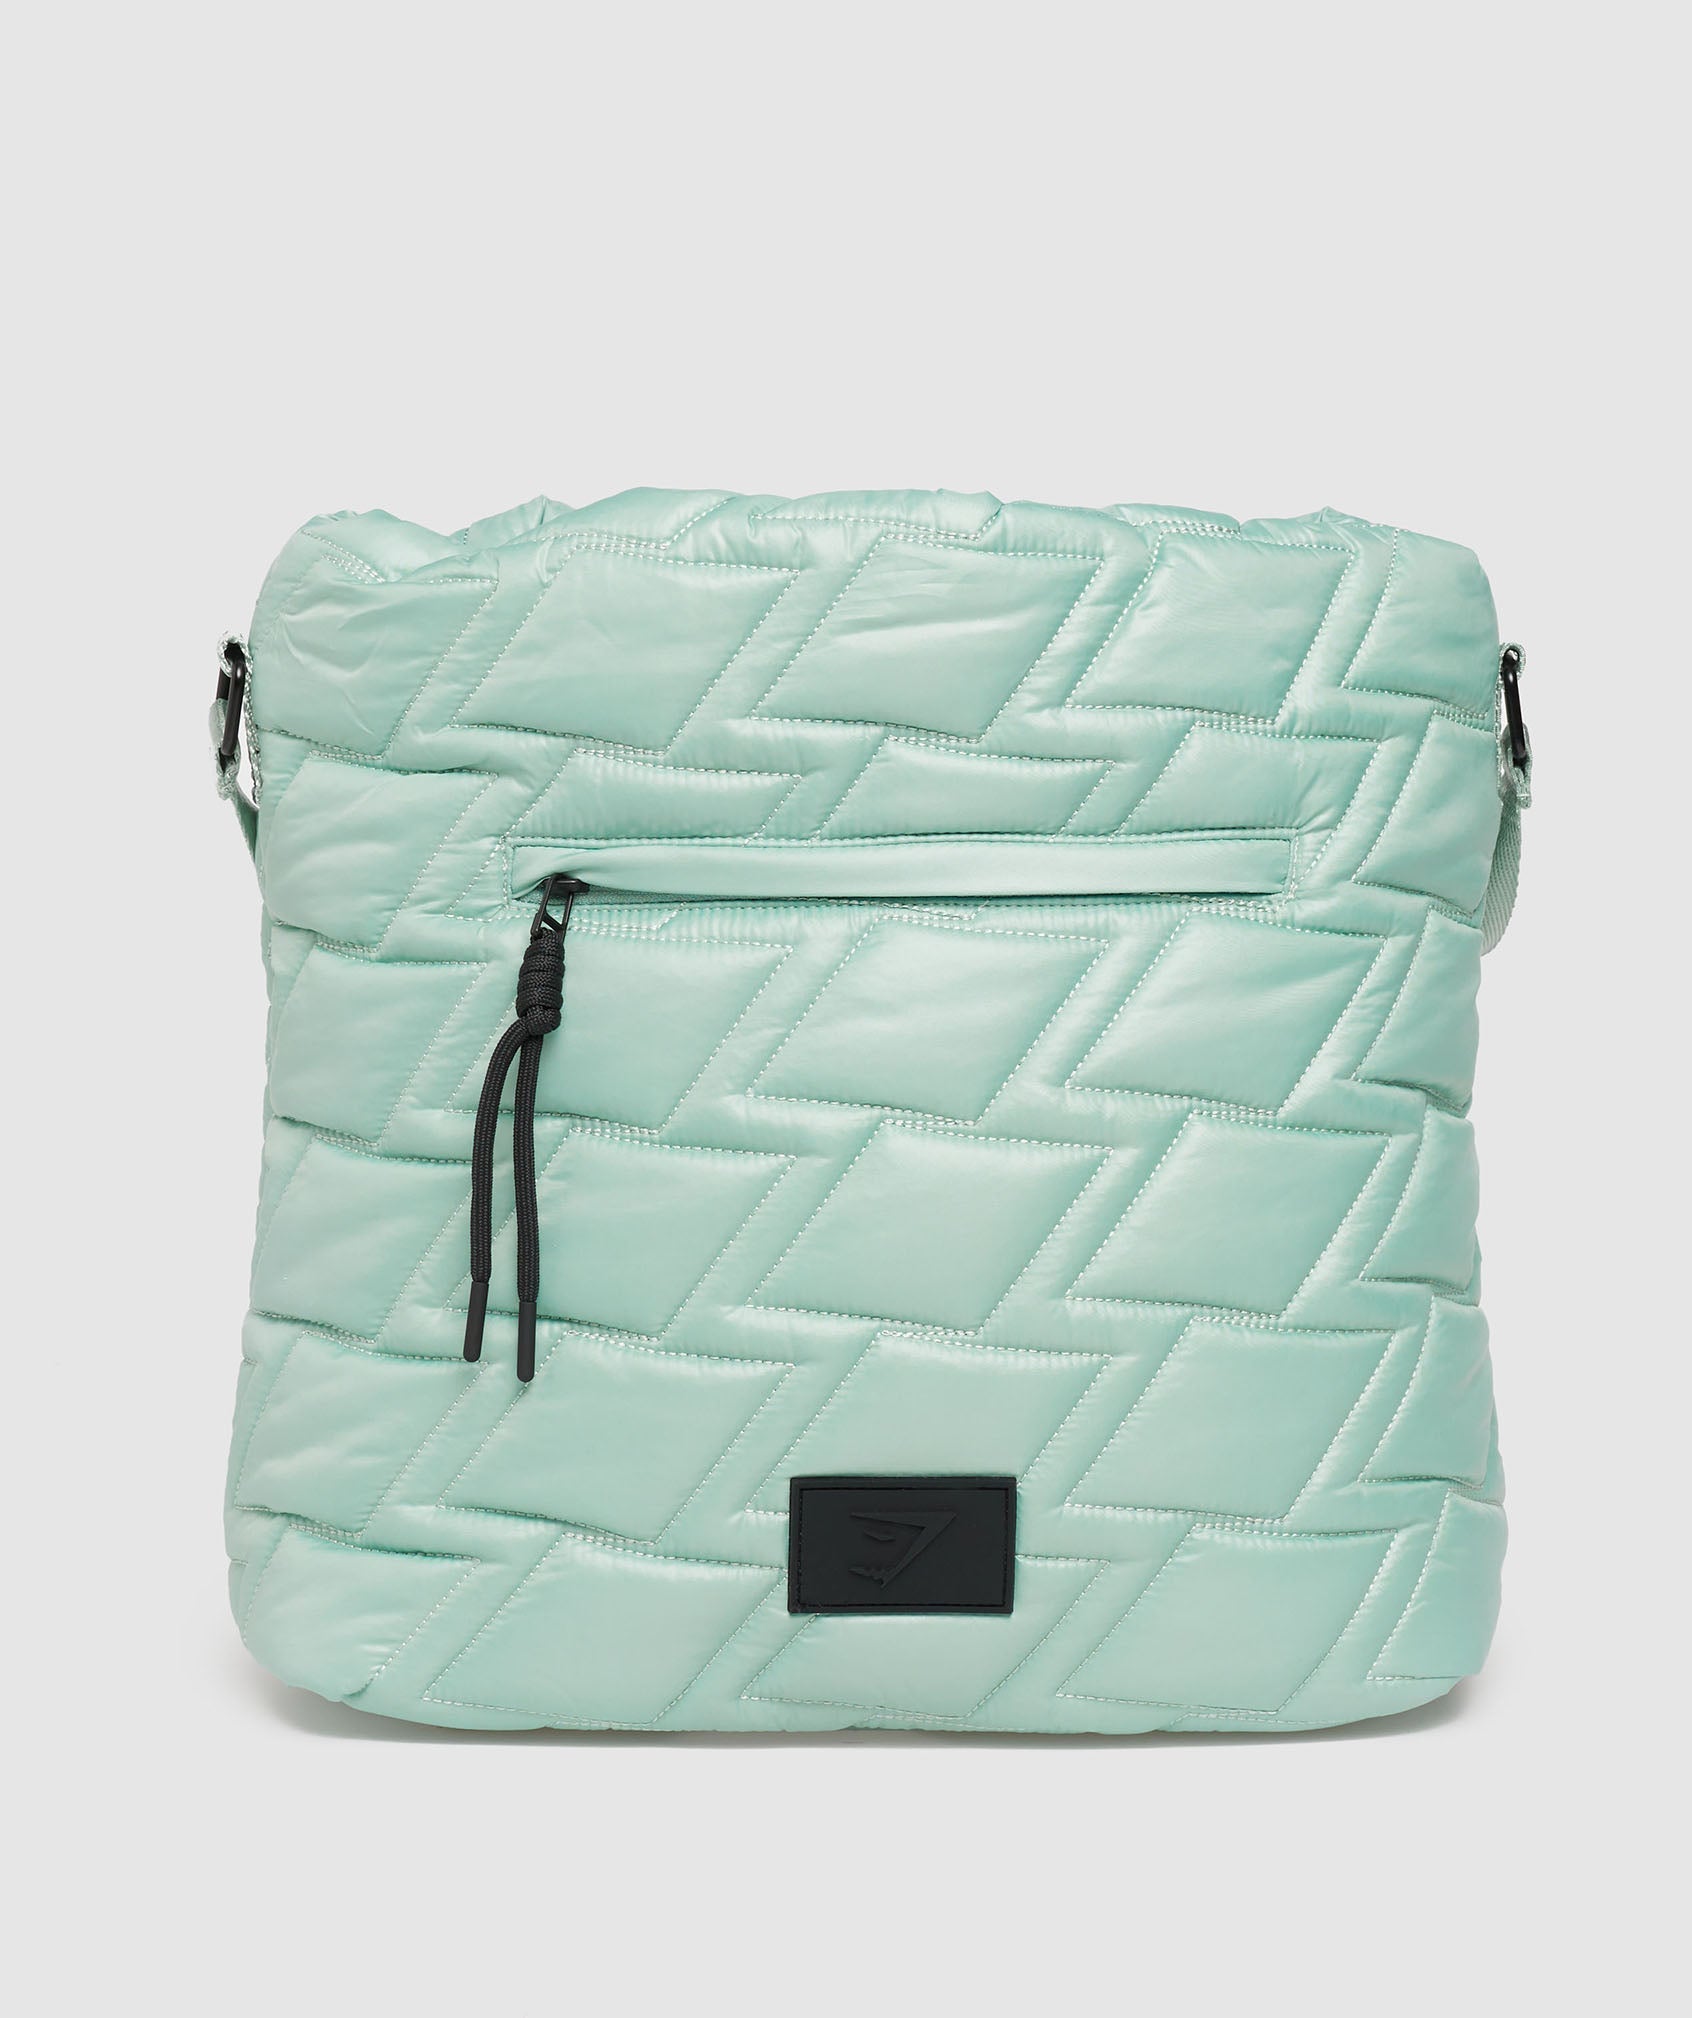 Quilted Yoga Tote in Frost Teal - view 2